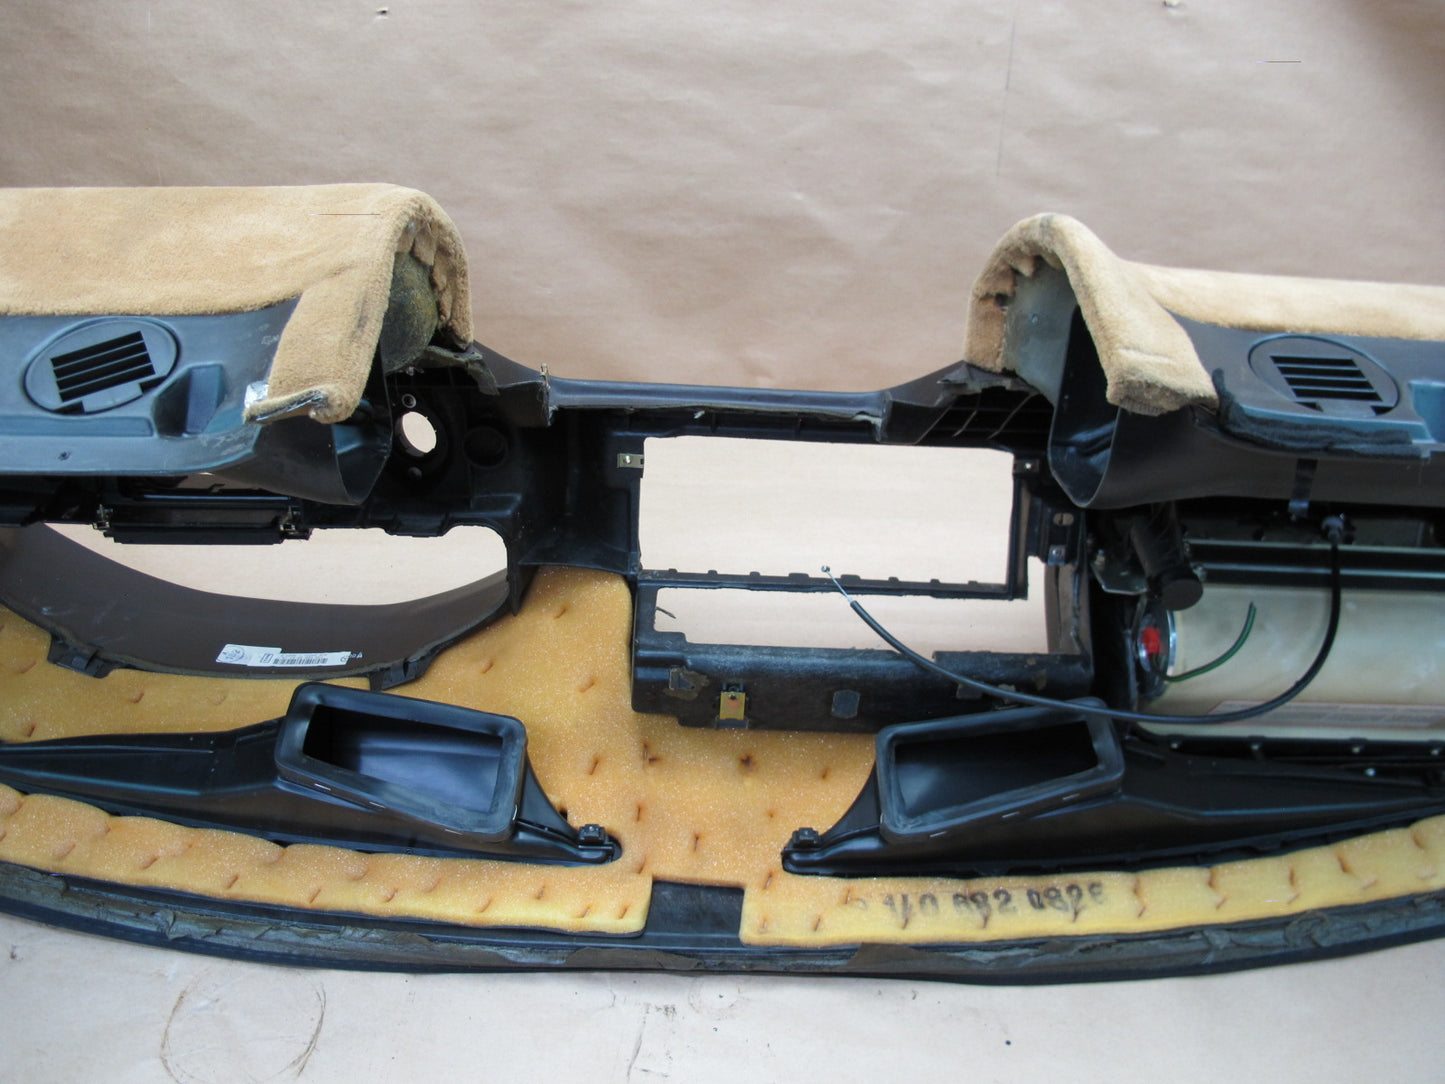 94-99 MERCEDES W140 S-CLASS DASHBOARD DASH INSTRUMENT COVER PANEL OEM